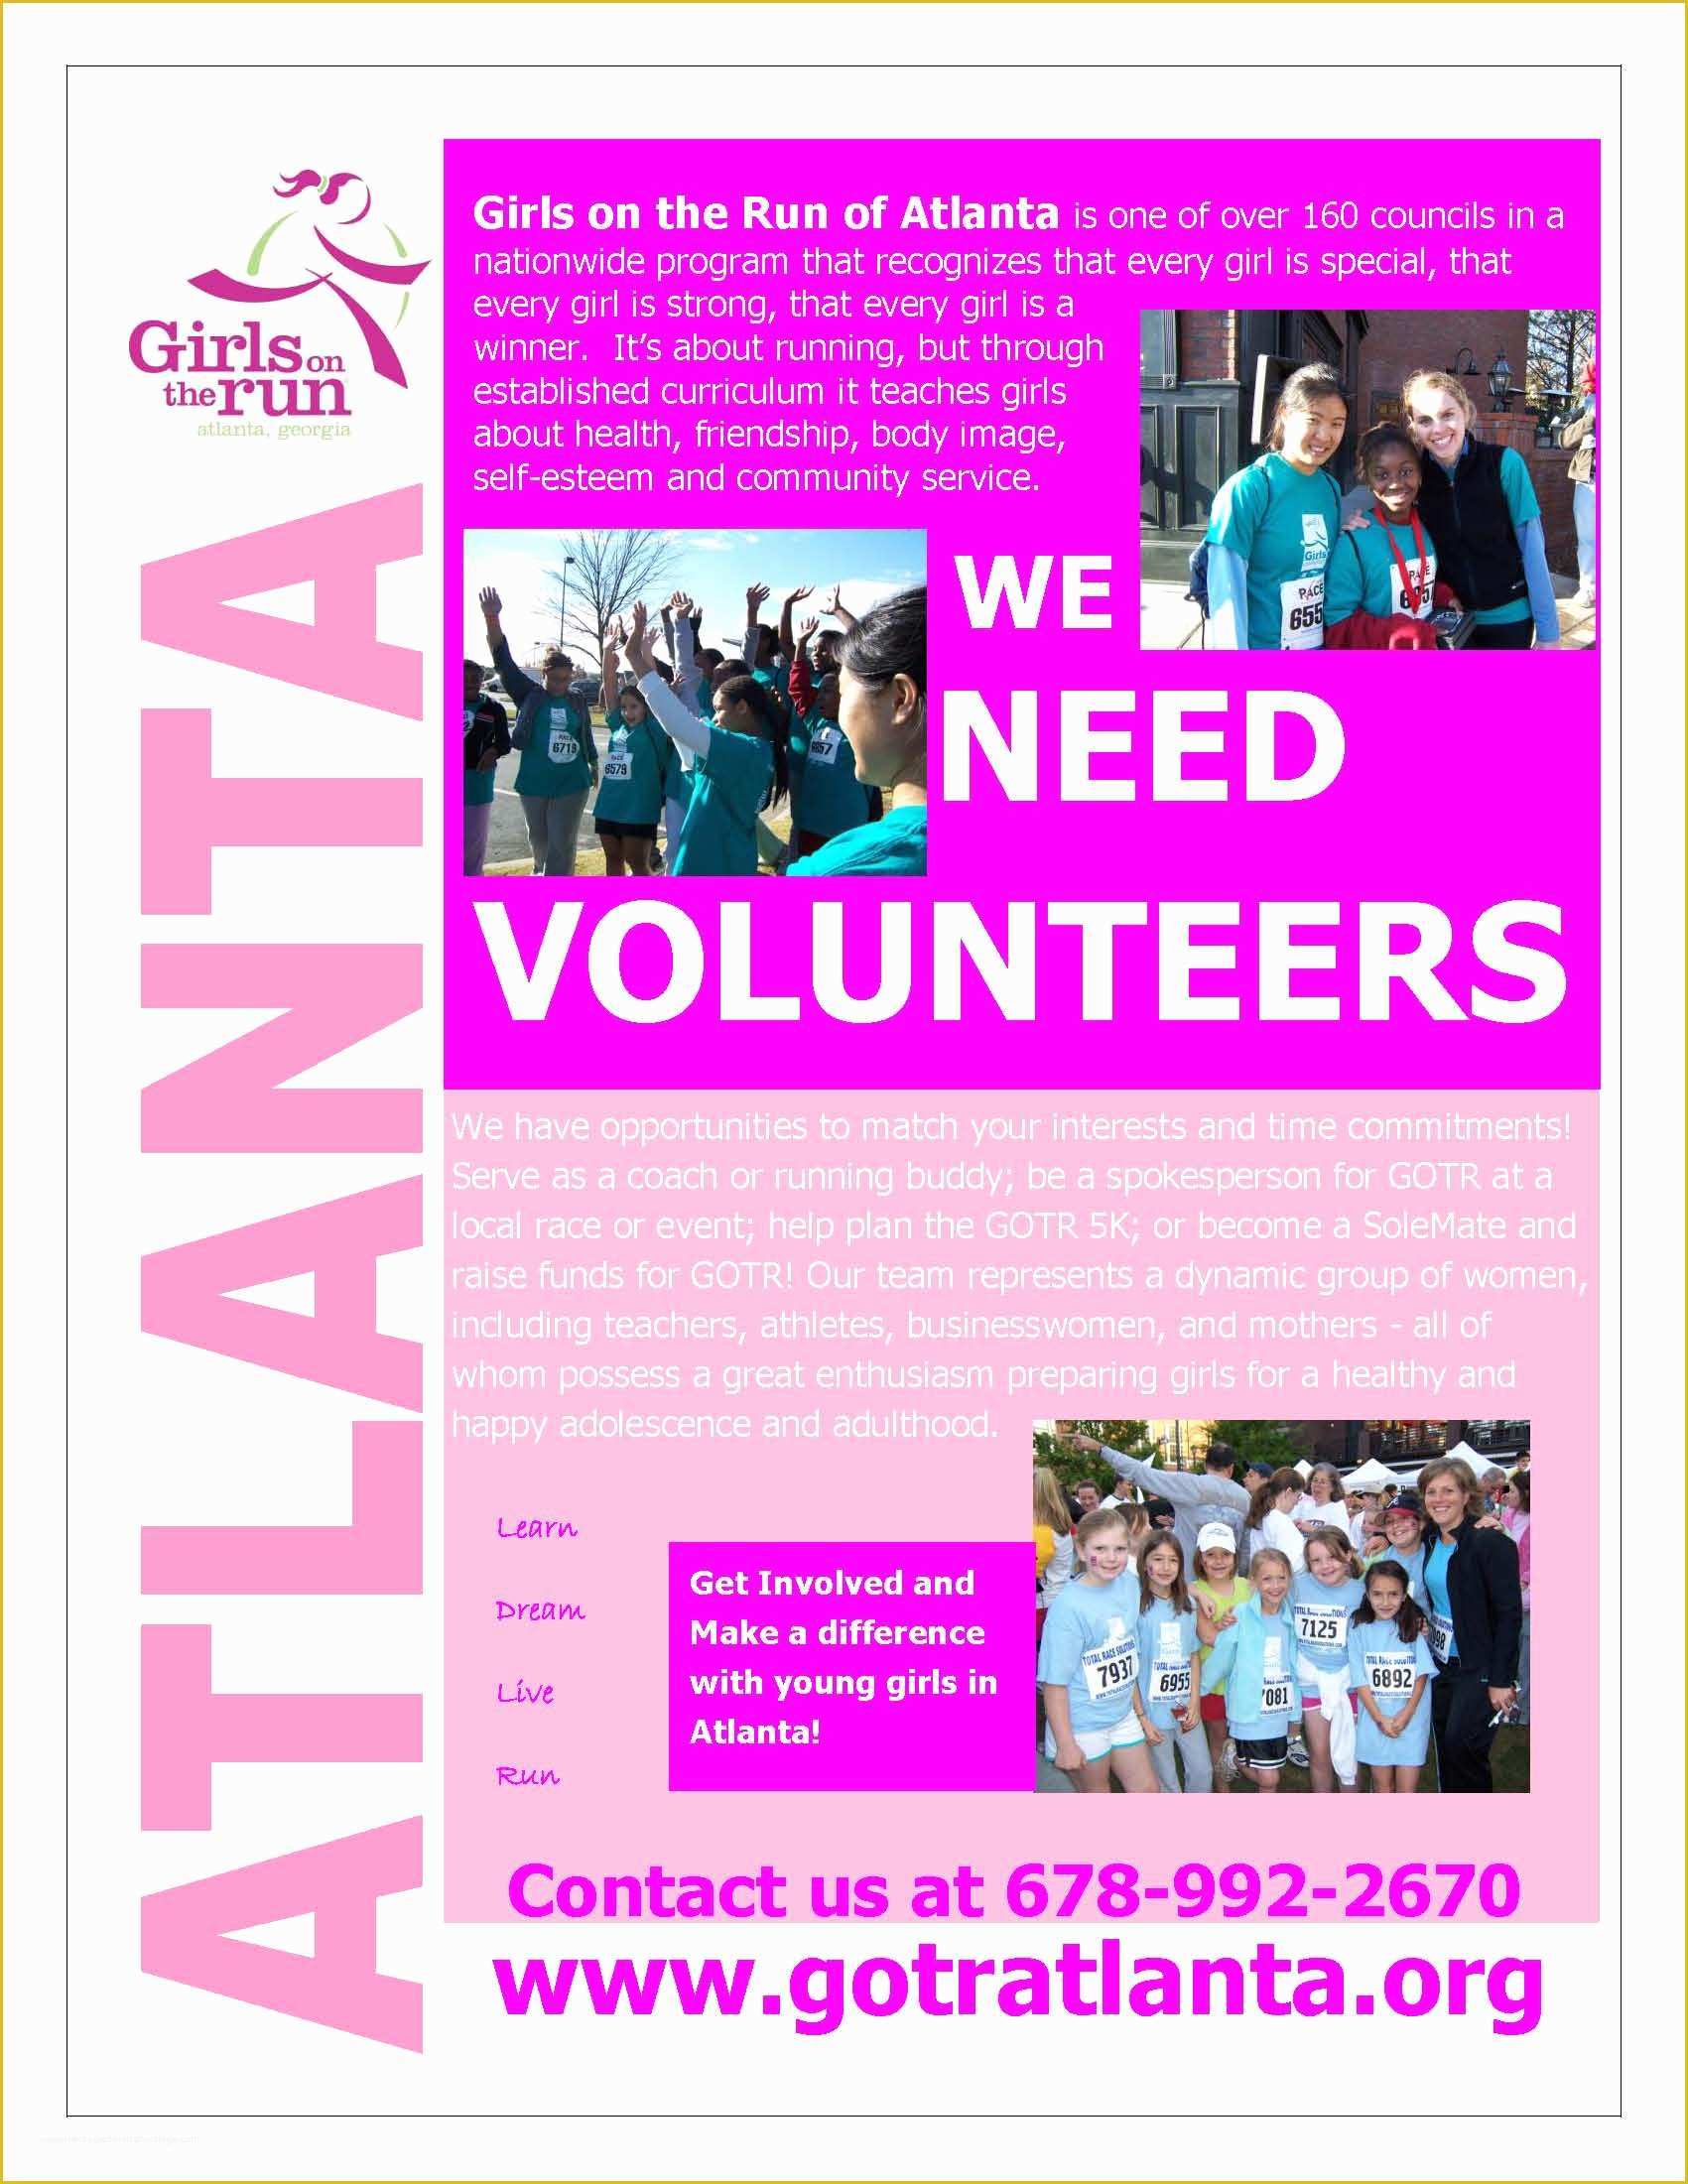 Free Volunteer Recruitment Flyer Template Of Girls the Run atlanta Wants You Want and Volunteers and